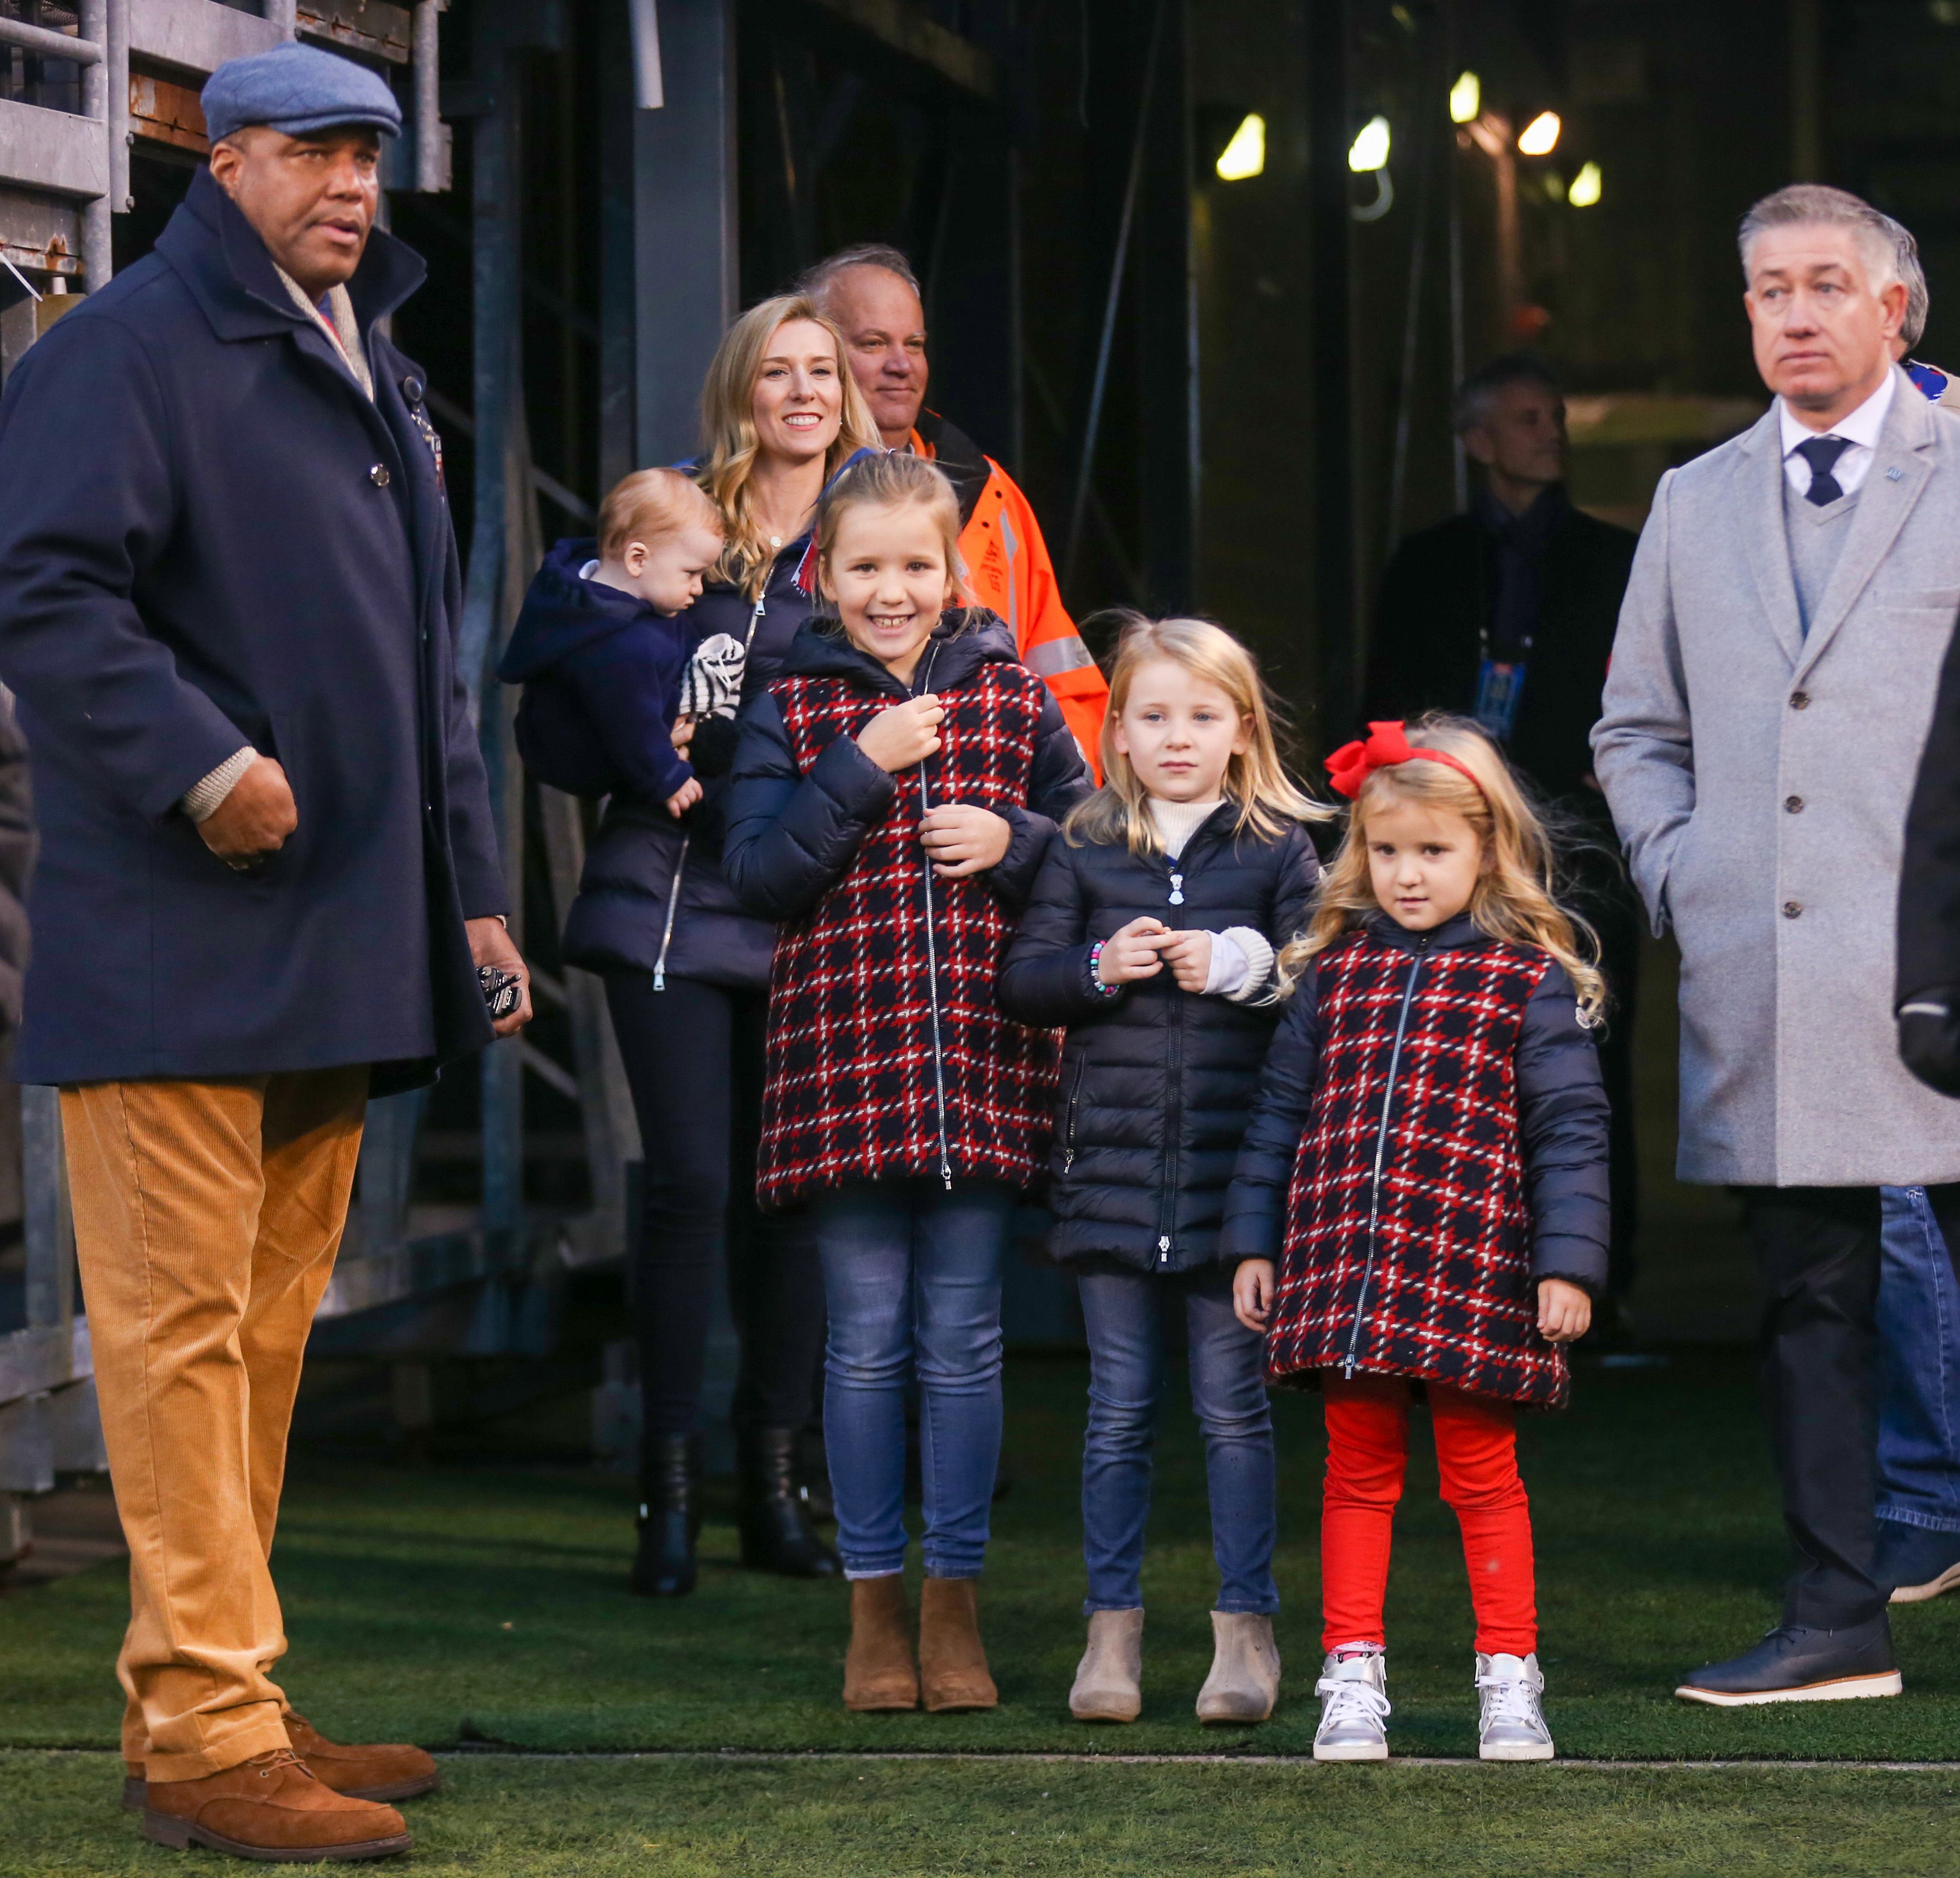 Eli Manning's send-off: Hugs, a family snapshot and one last happy memory  for Giants fans